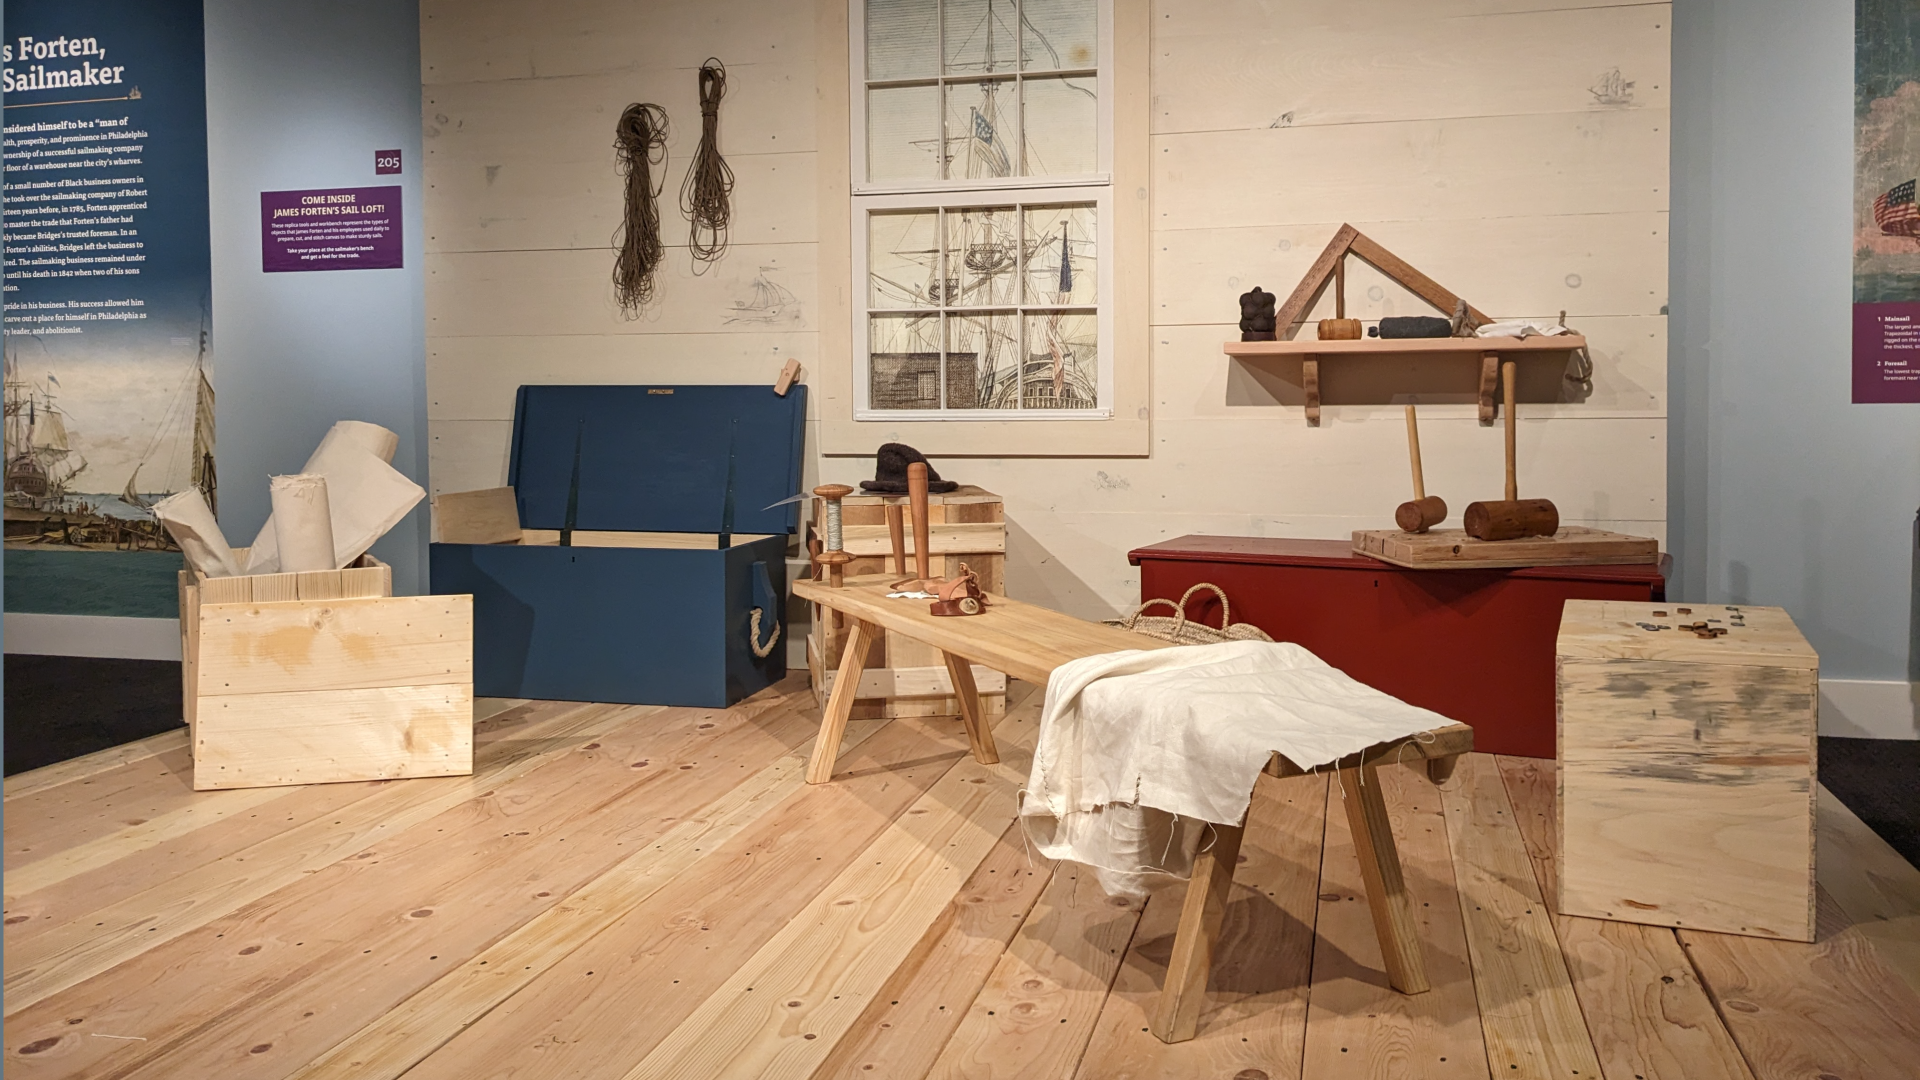  A recreation of James Forten's sail loft at the Museum of the American Revolution's exhibit.  